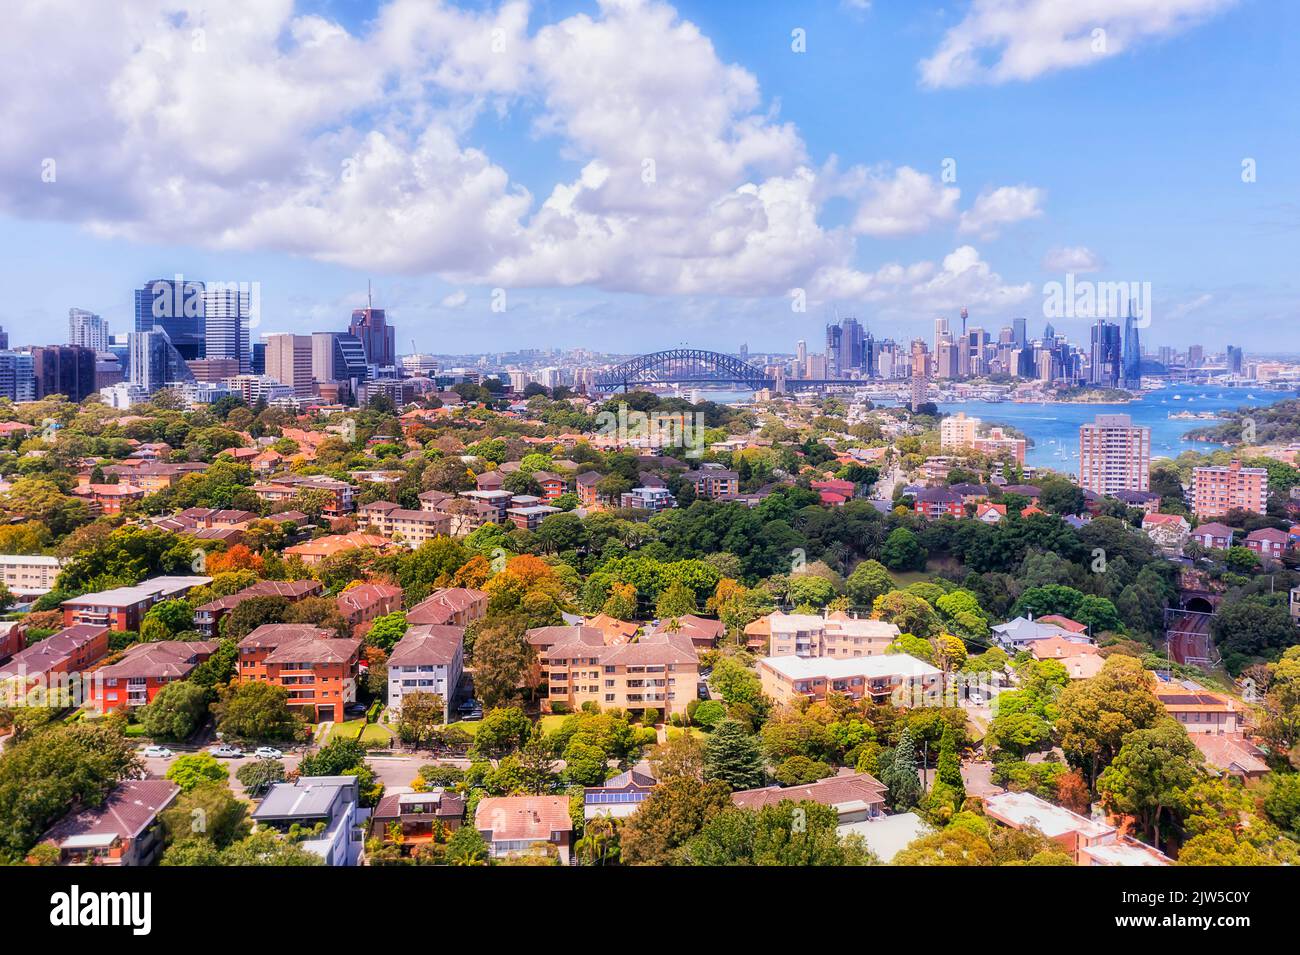 Green residential wealthy suburb on Lower North Shore of Sydney in view of major city CBD landmarks - aerial cityscape. Stock Photo